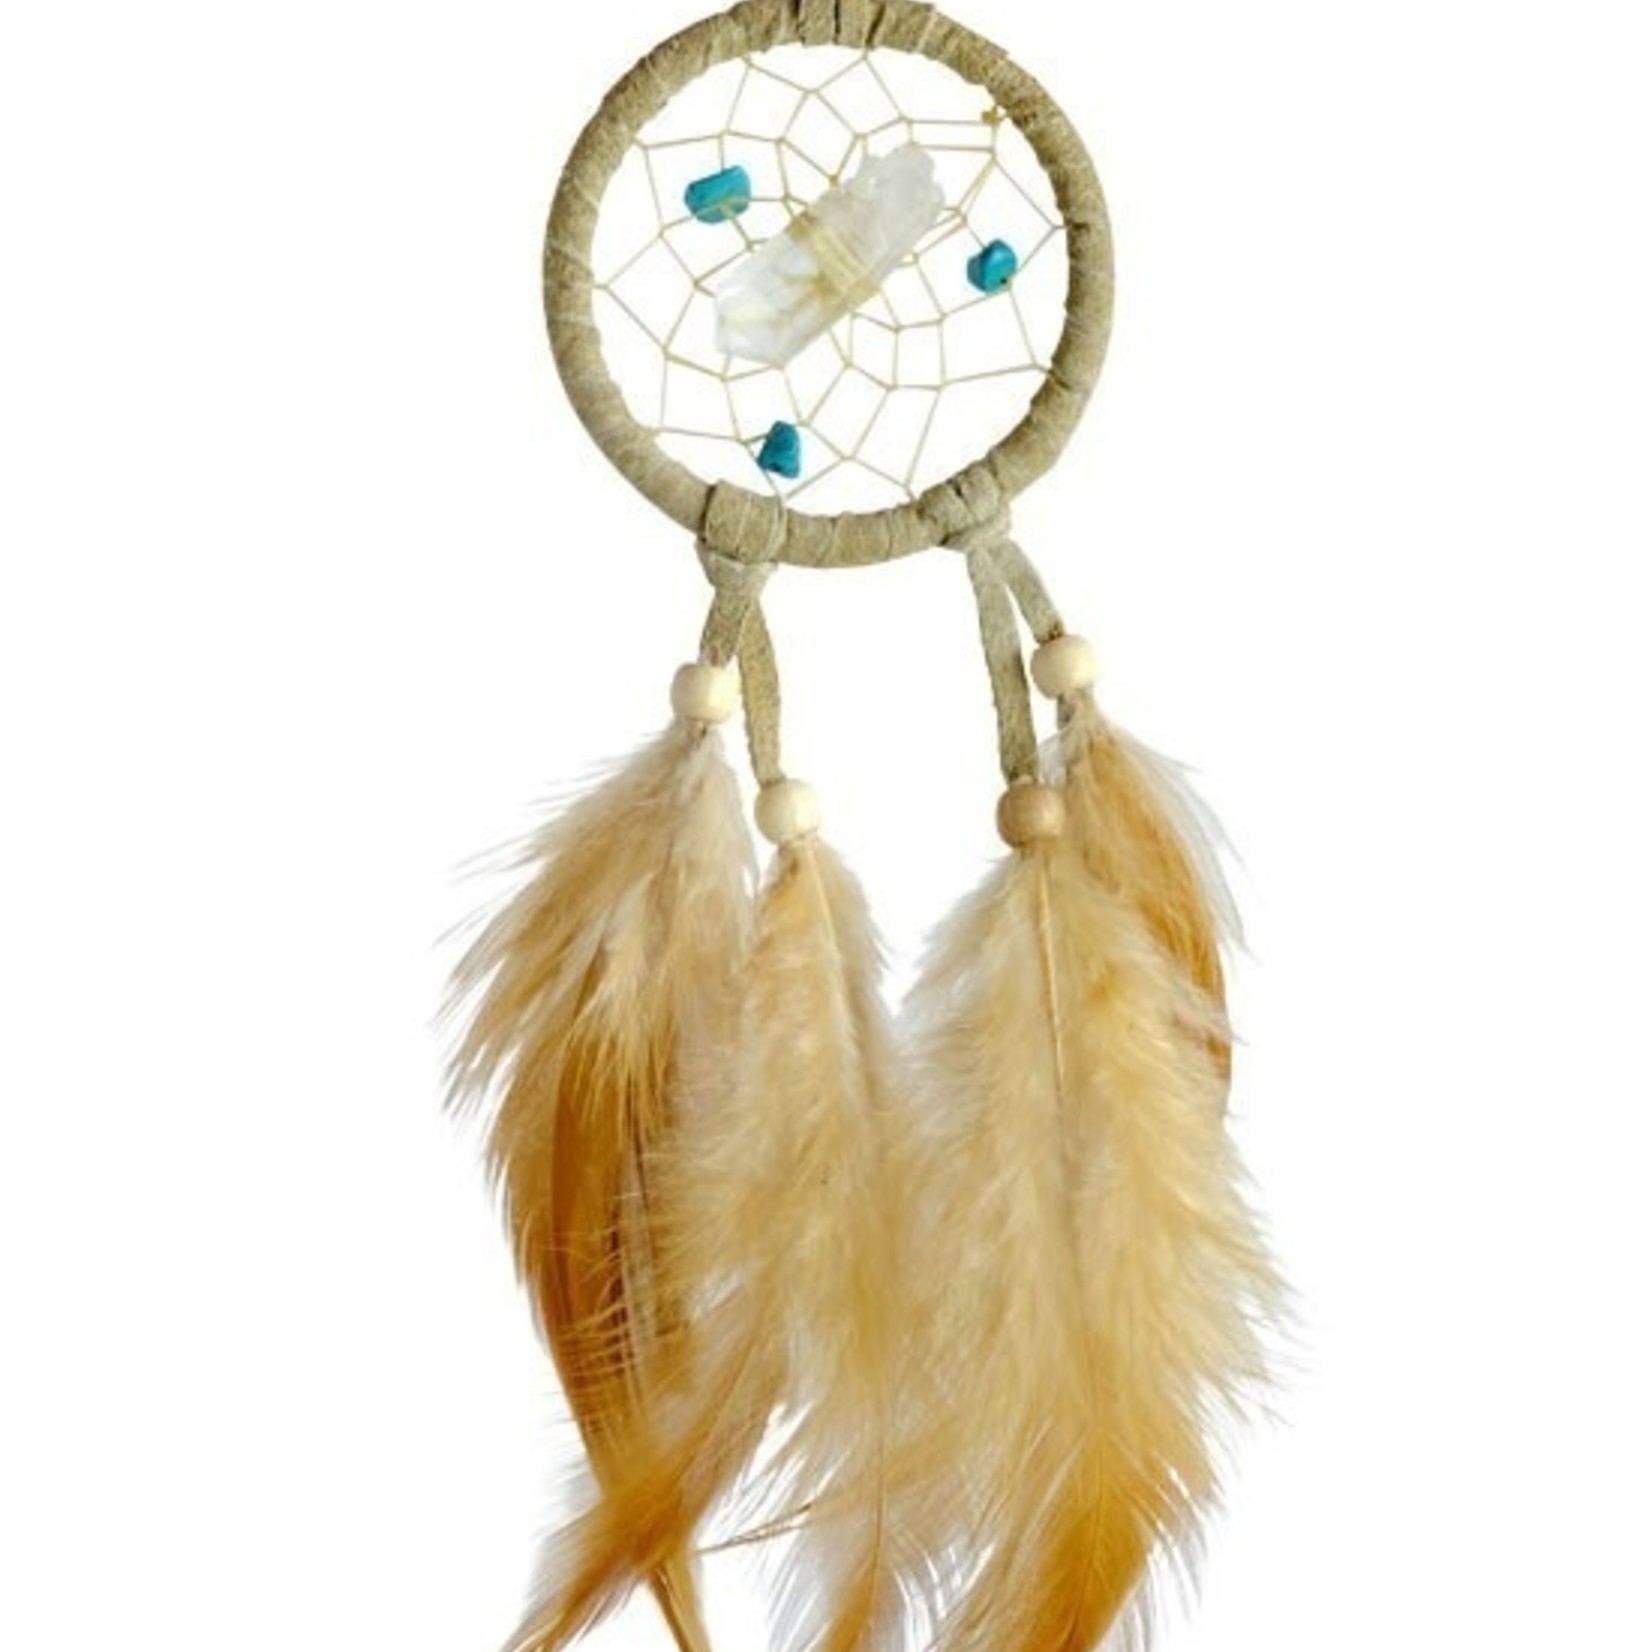 Tan Vision Seeker Dream Catcher detailed with quartz crystal in the centre of the web.